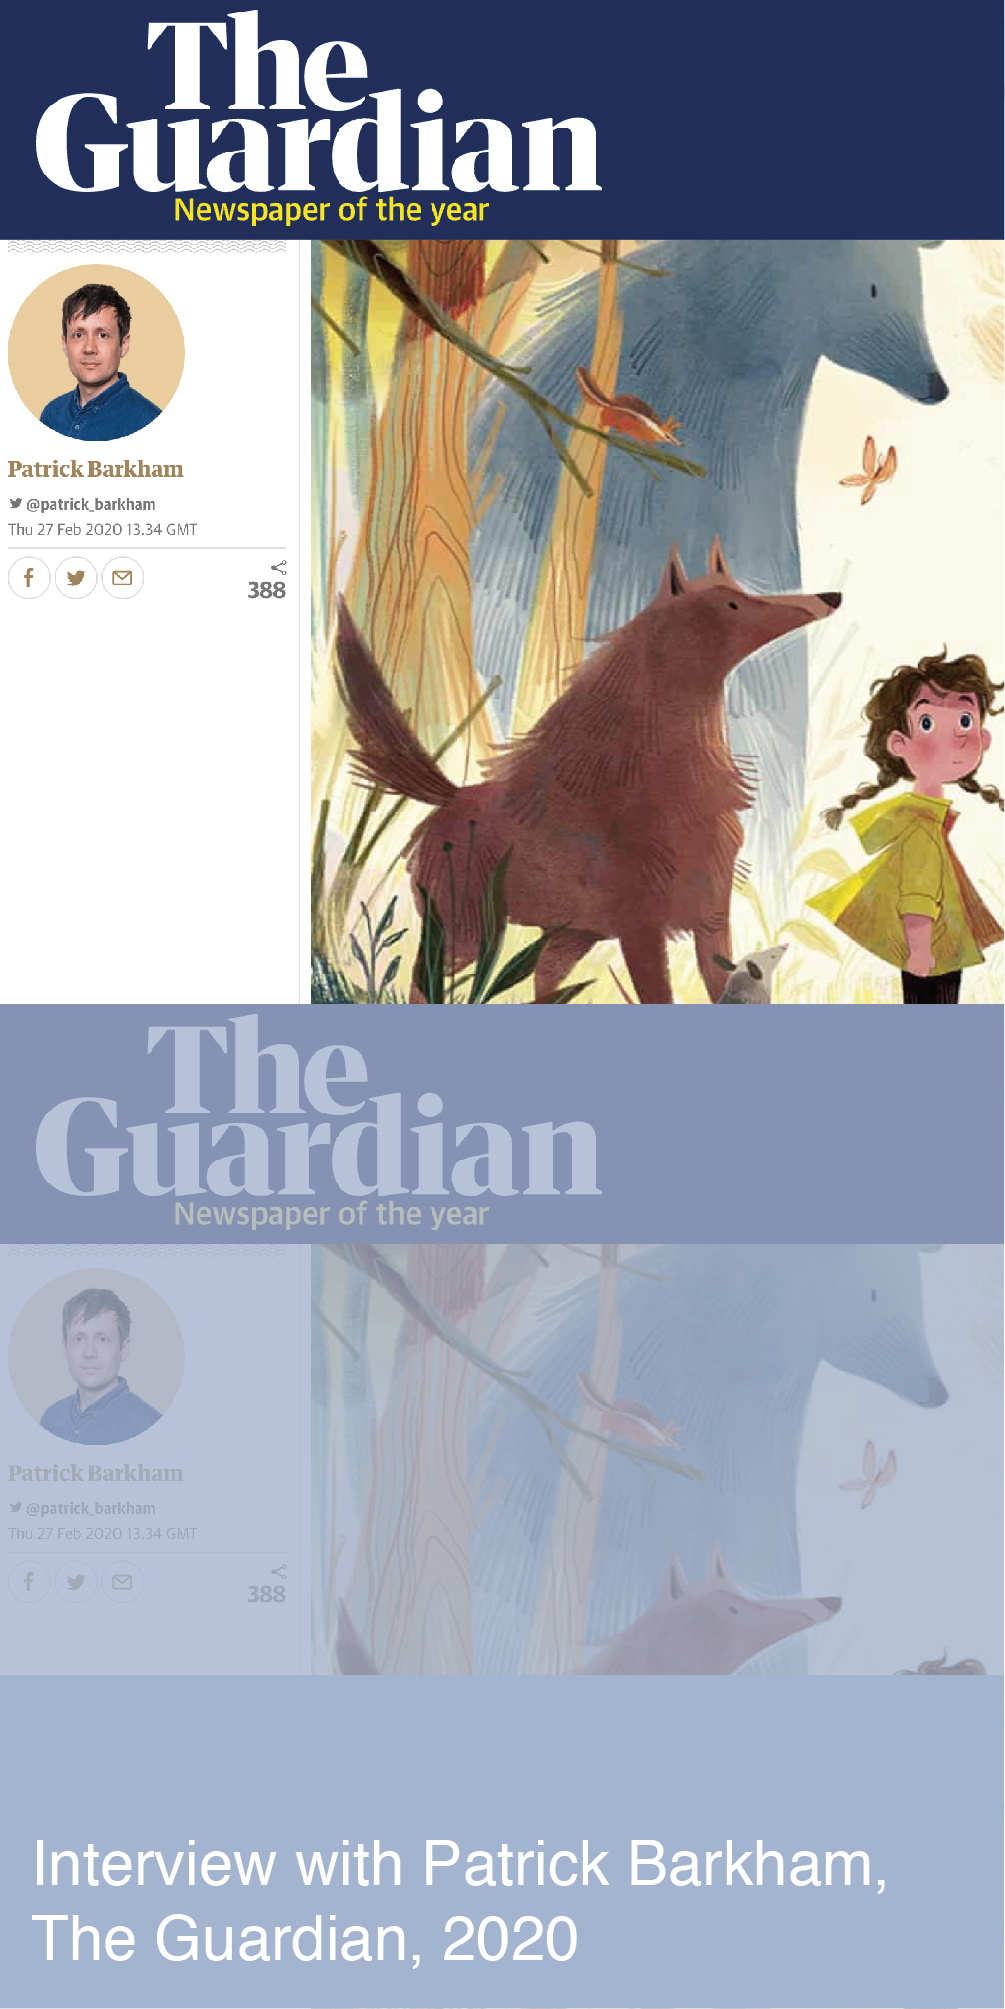 Interview with Patrick Barkham in the Guardian